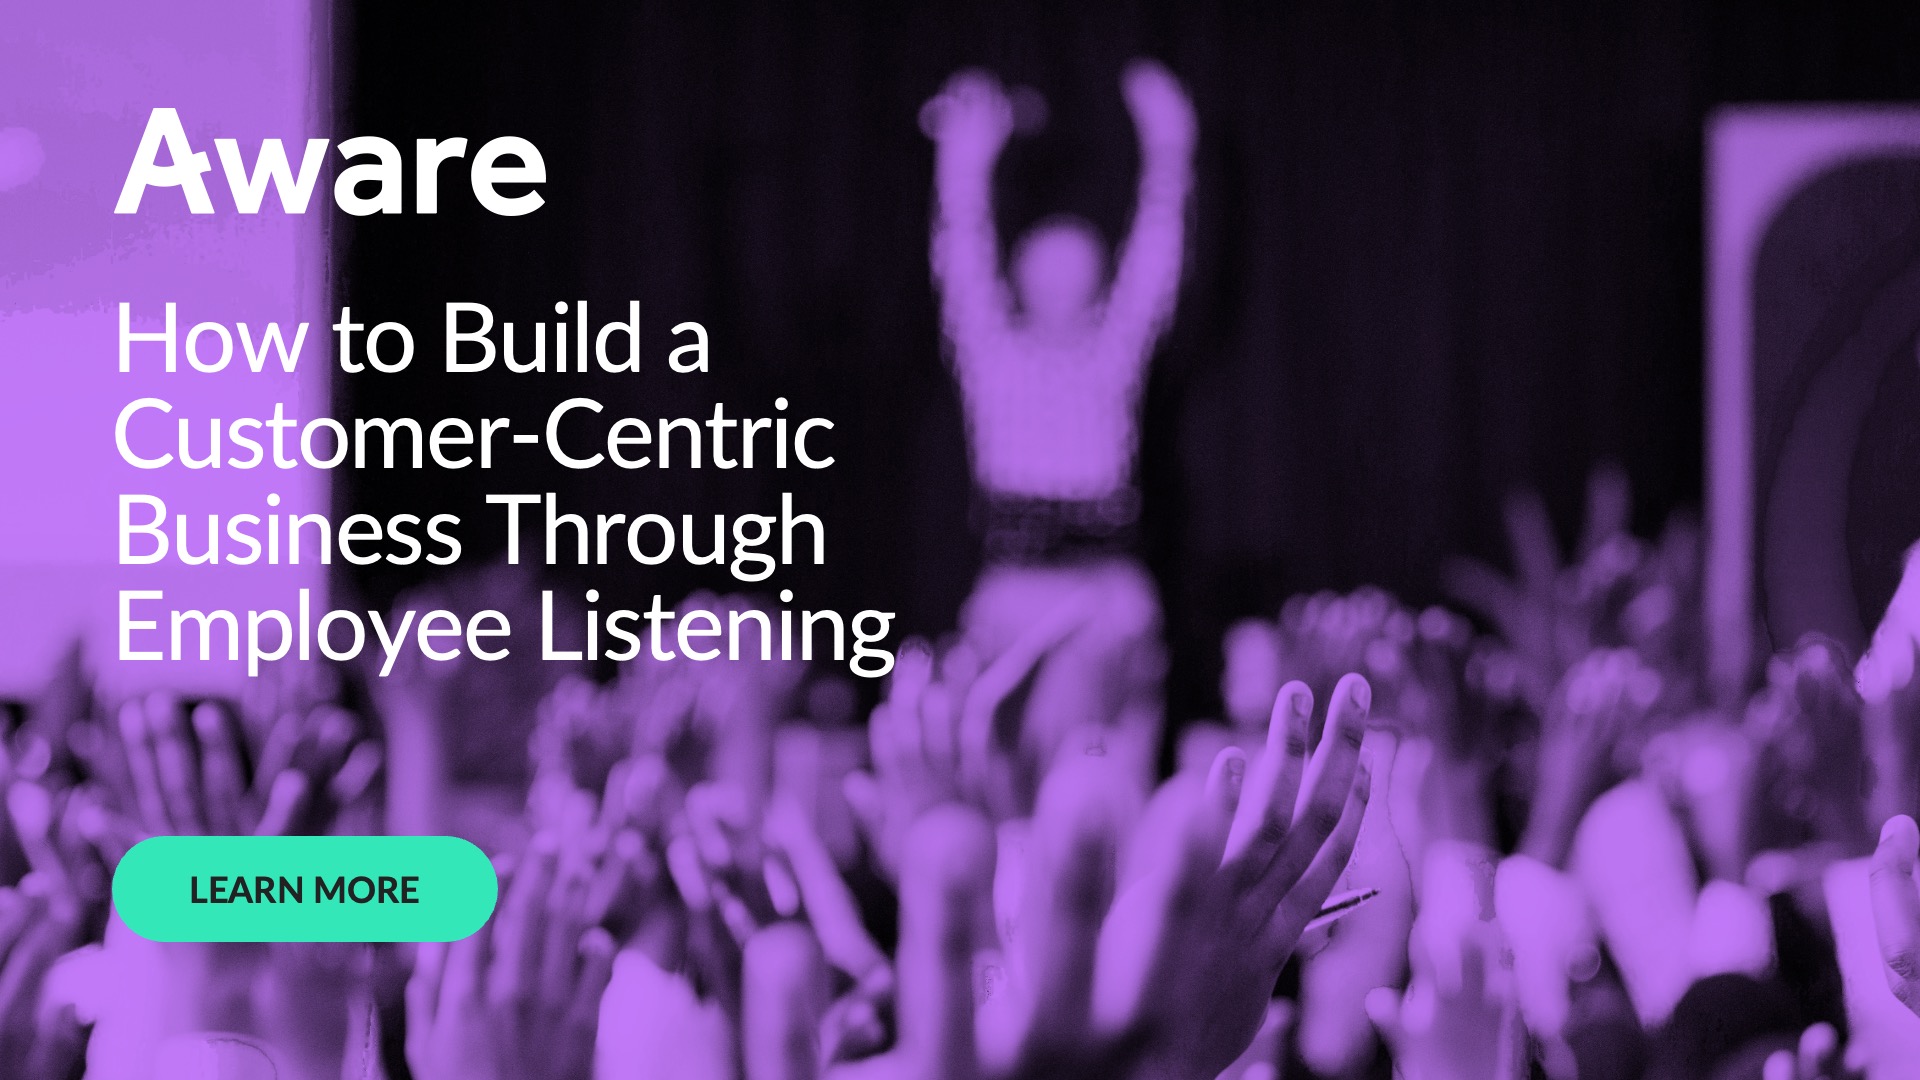 How to Build a Customer-Centric Business Through Employee Listening